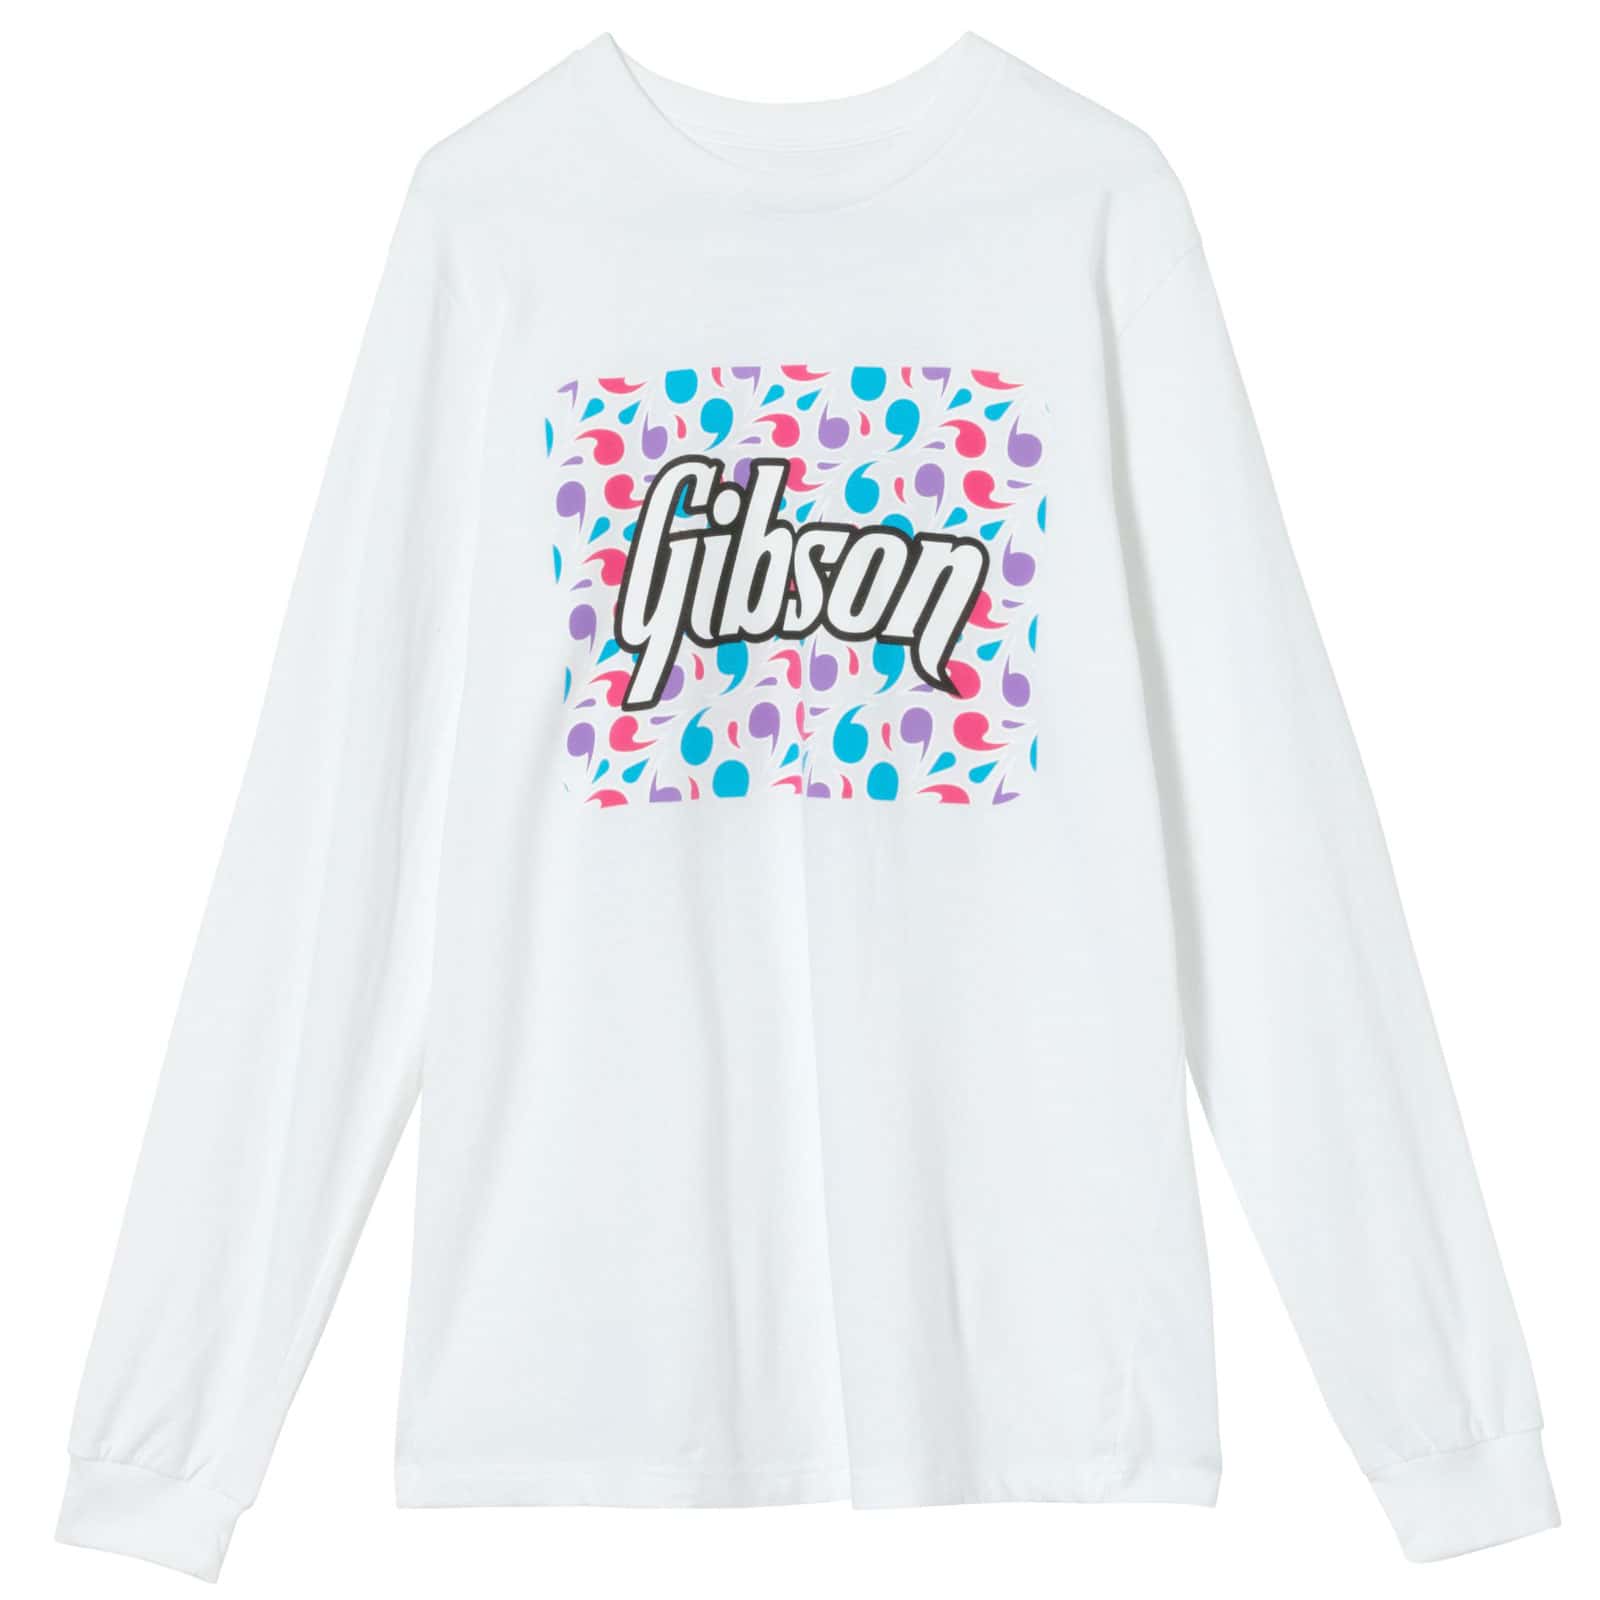 GIBSON ACCESSORIES FLORAL BLOCK LOGO LONG SLEEVE TEE WHITE TAILLE M 